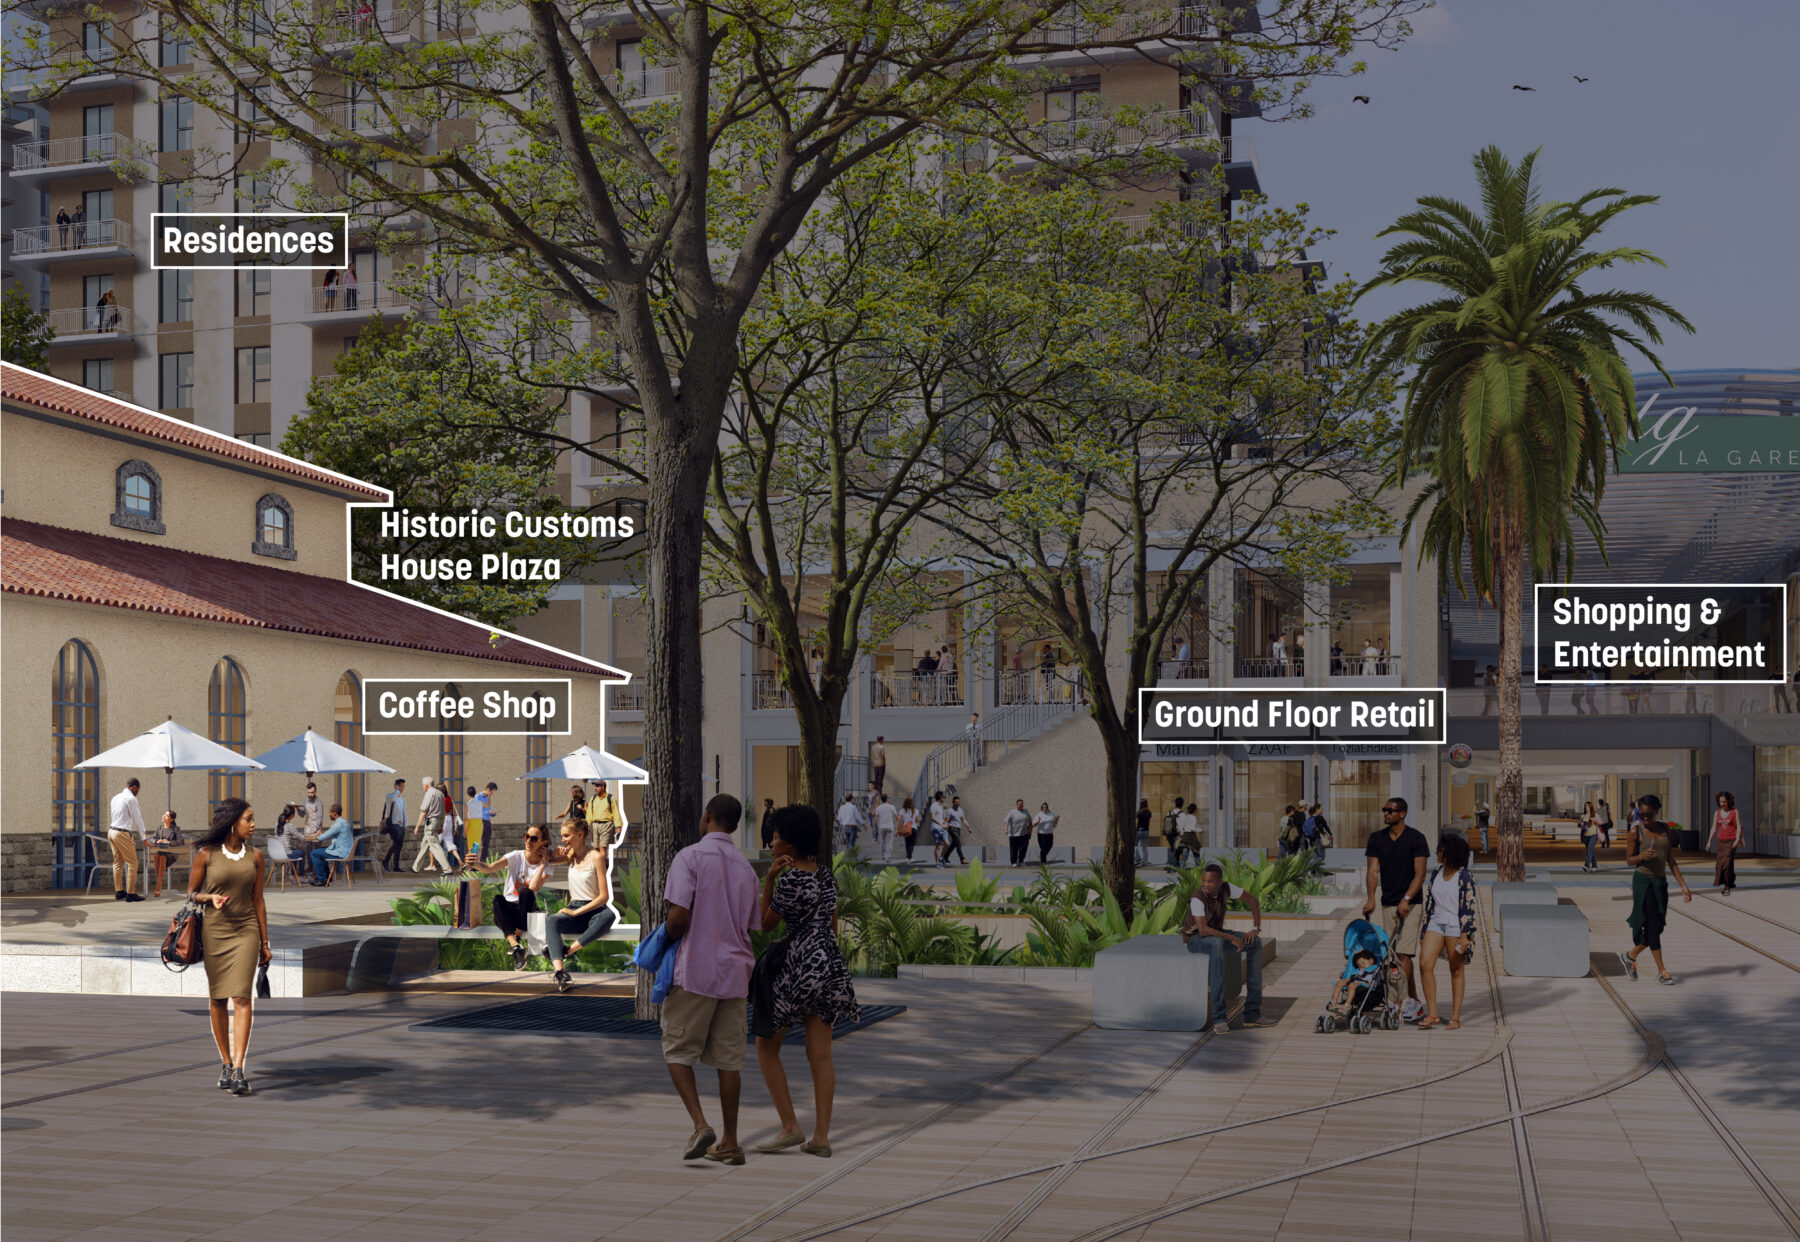 Rendering of the Historic Customs House Plaza showing the street level amenities and high rise residences in the background